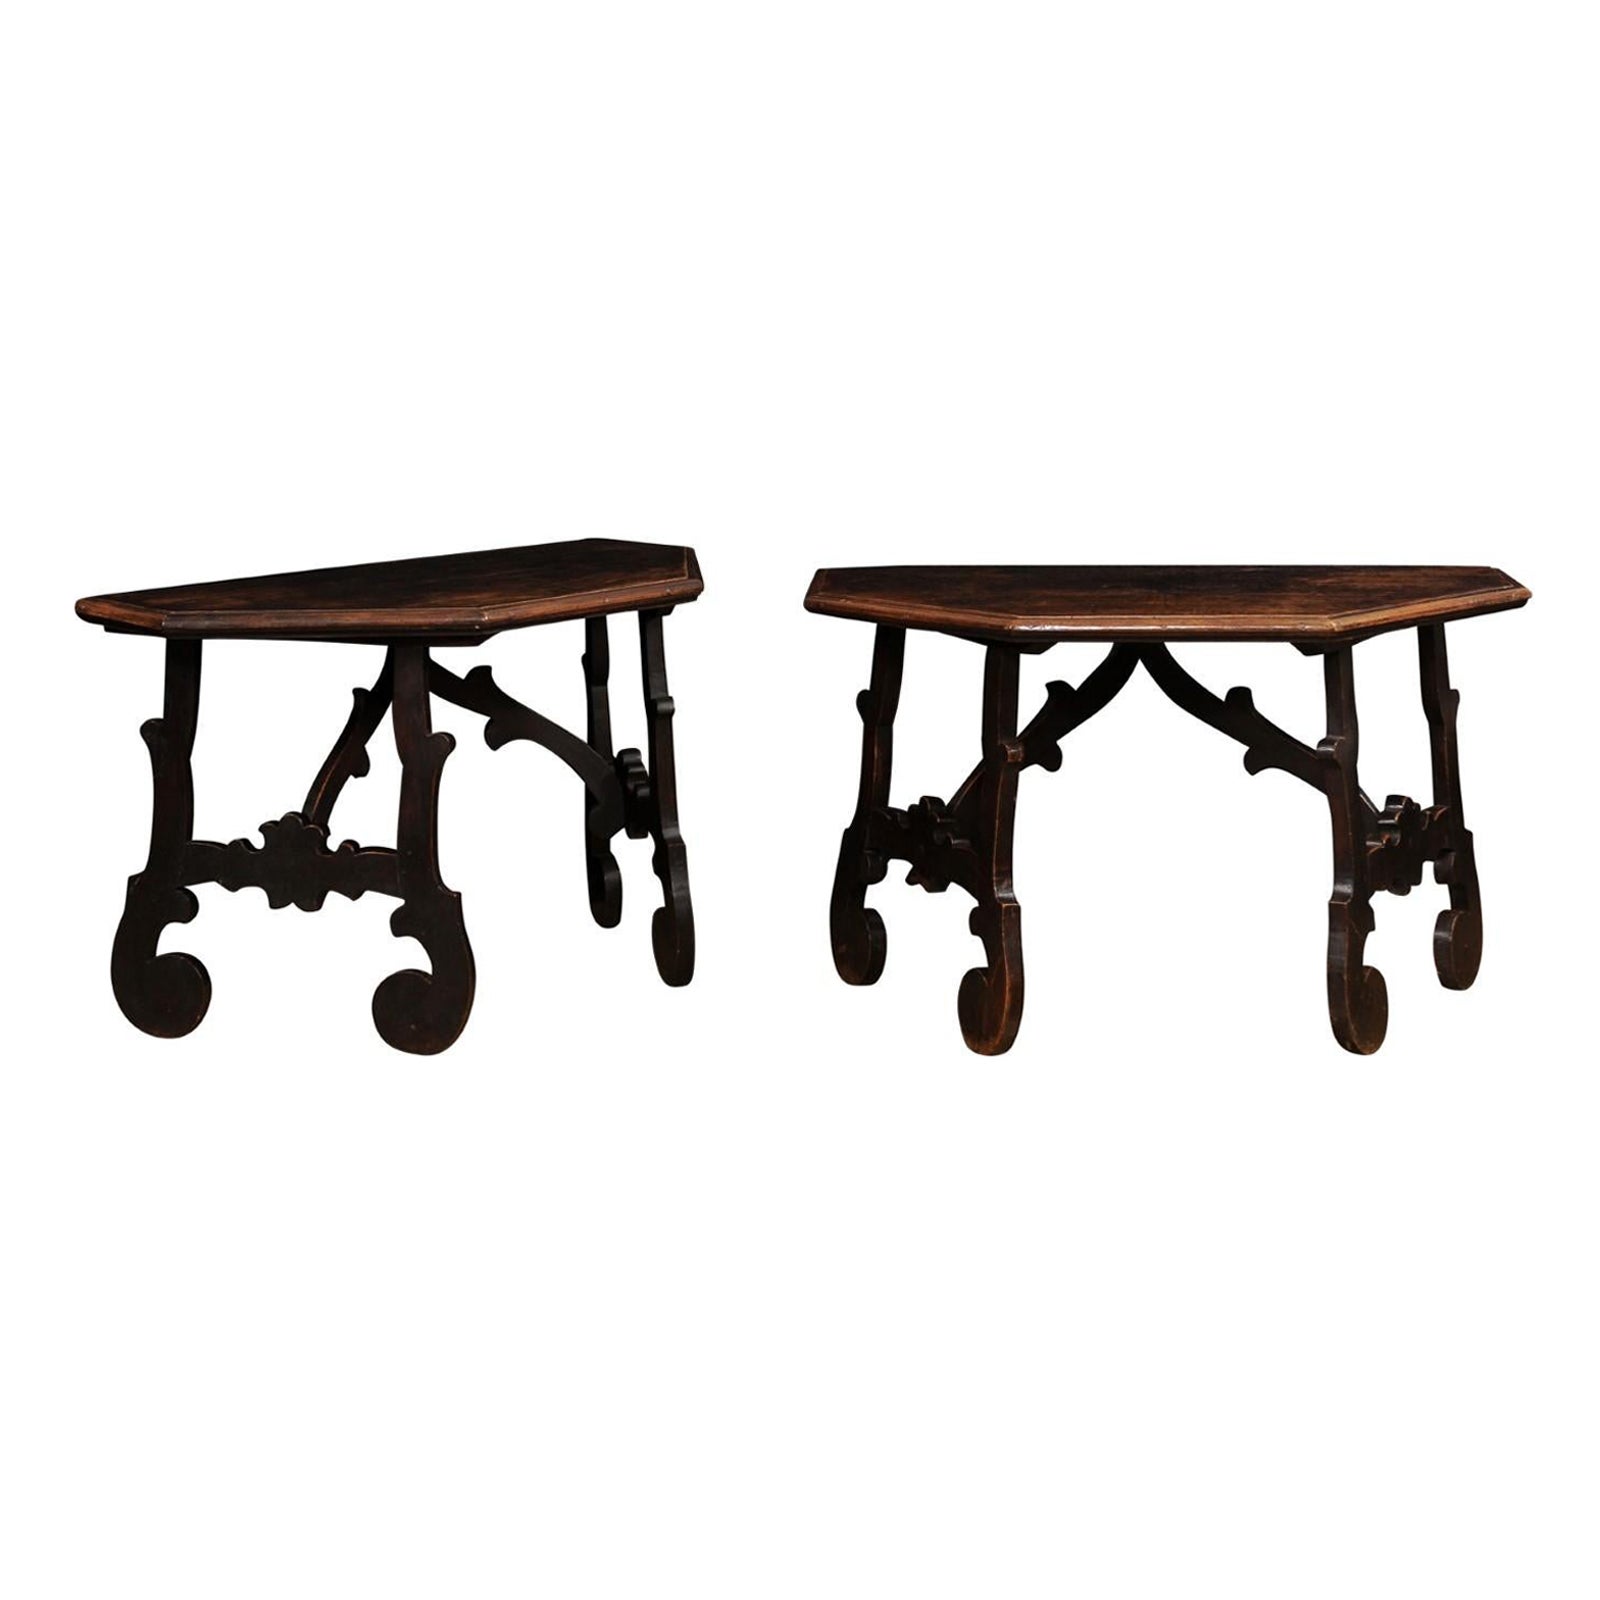 17th Century Italian Baroque Walnut Fratino Consoles with Carved Bases, a Pair